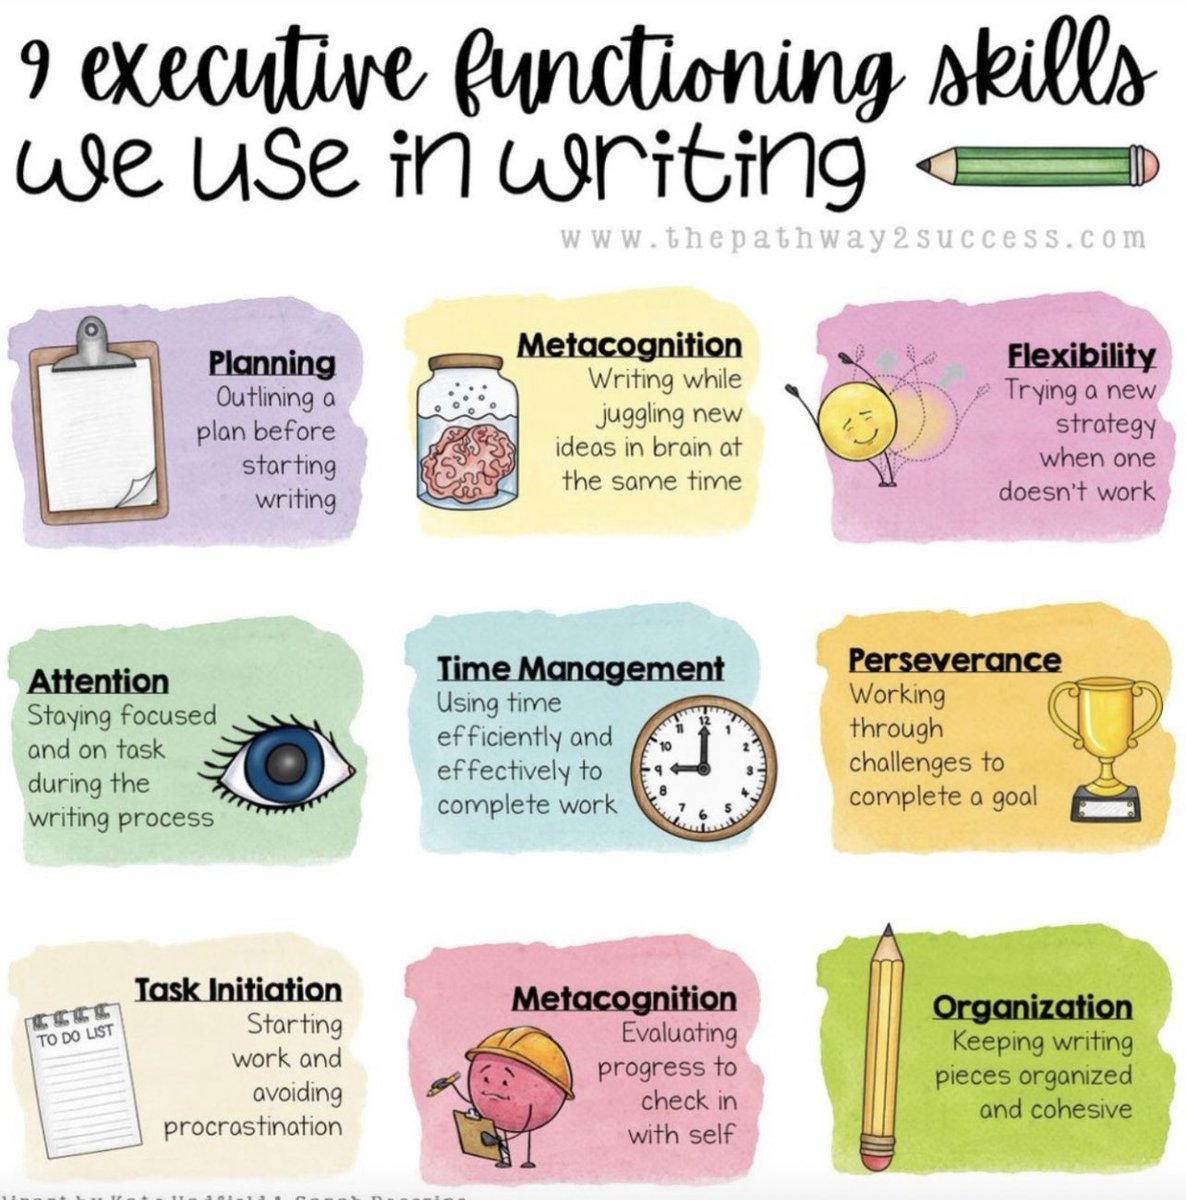 Writing uses a number of executive functions. 
Now, add in the challenge of writing in a second (or third) language! 
Set your students up for success… Scaffold. Provide graphic organizers. Make the writing task meaningful. #executivefunctions #englishlanguagelearners